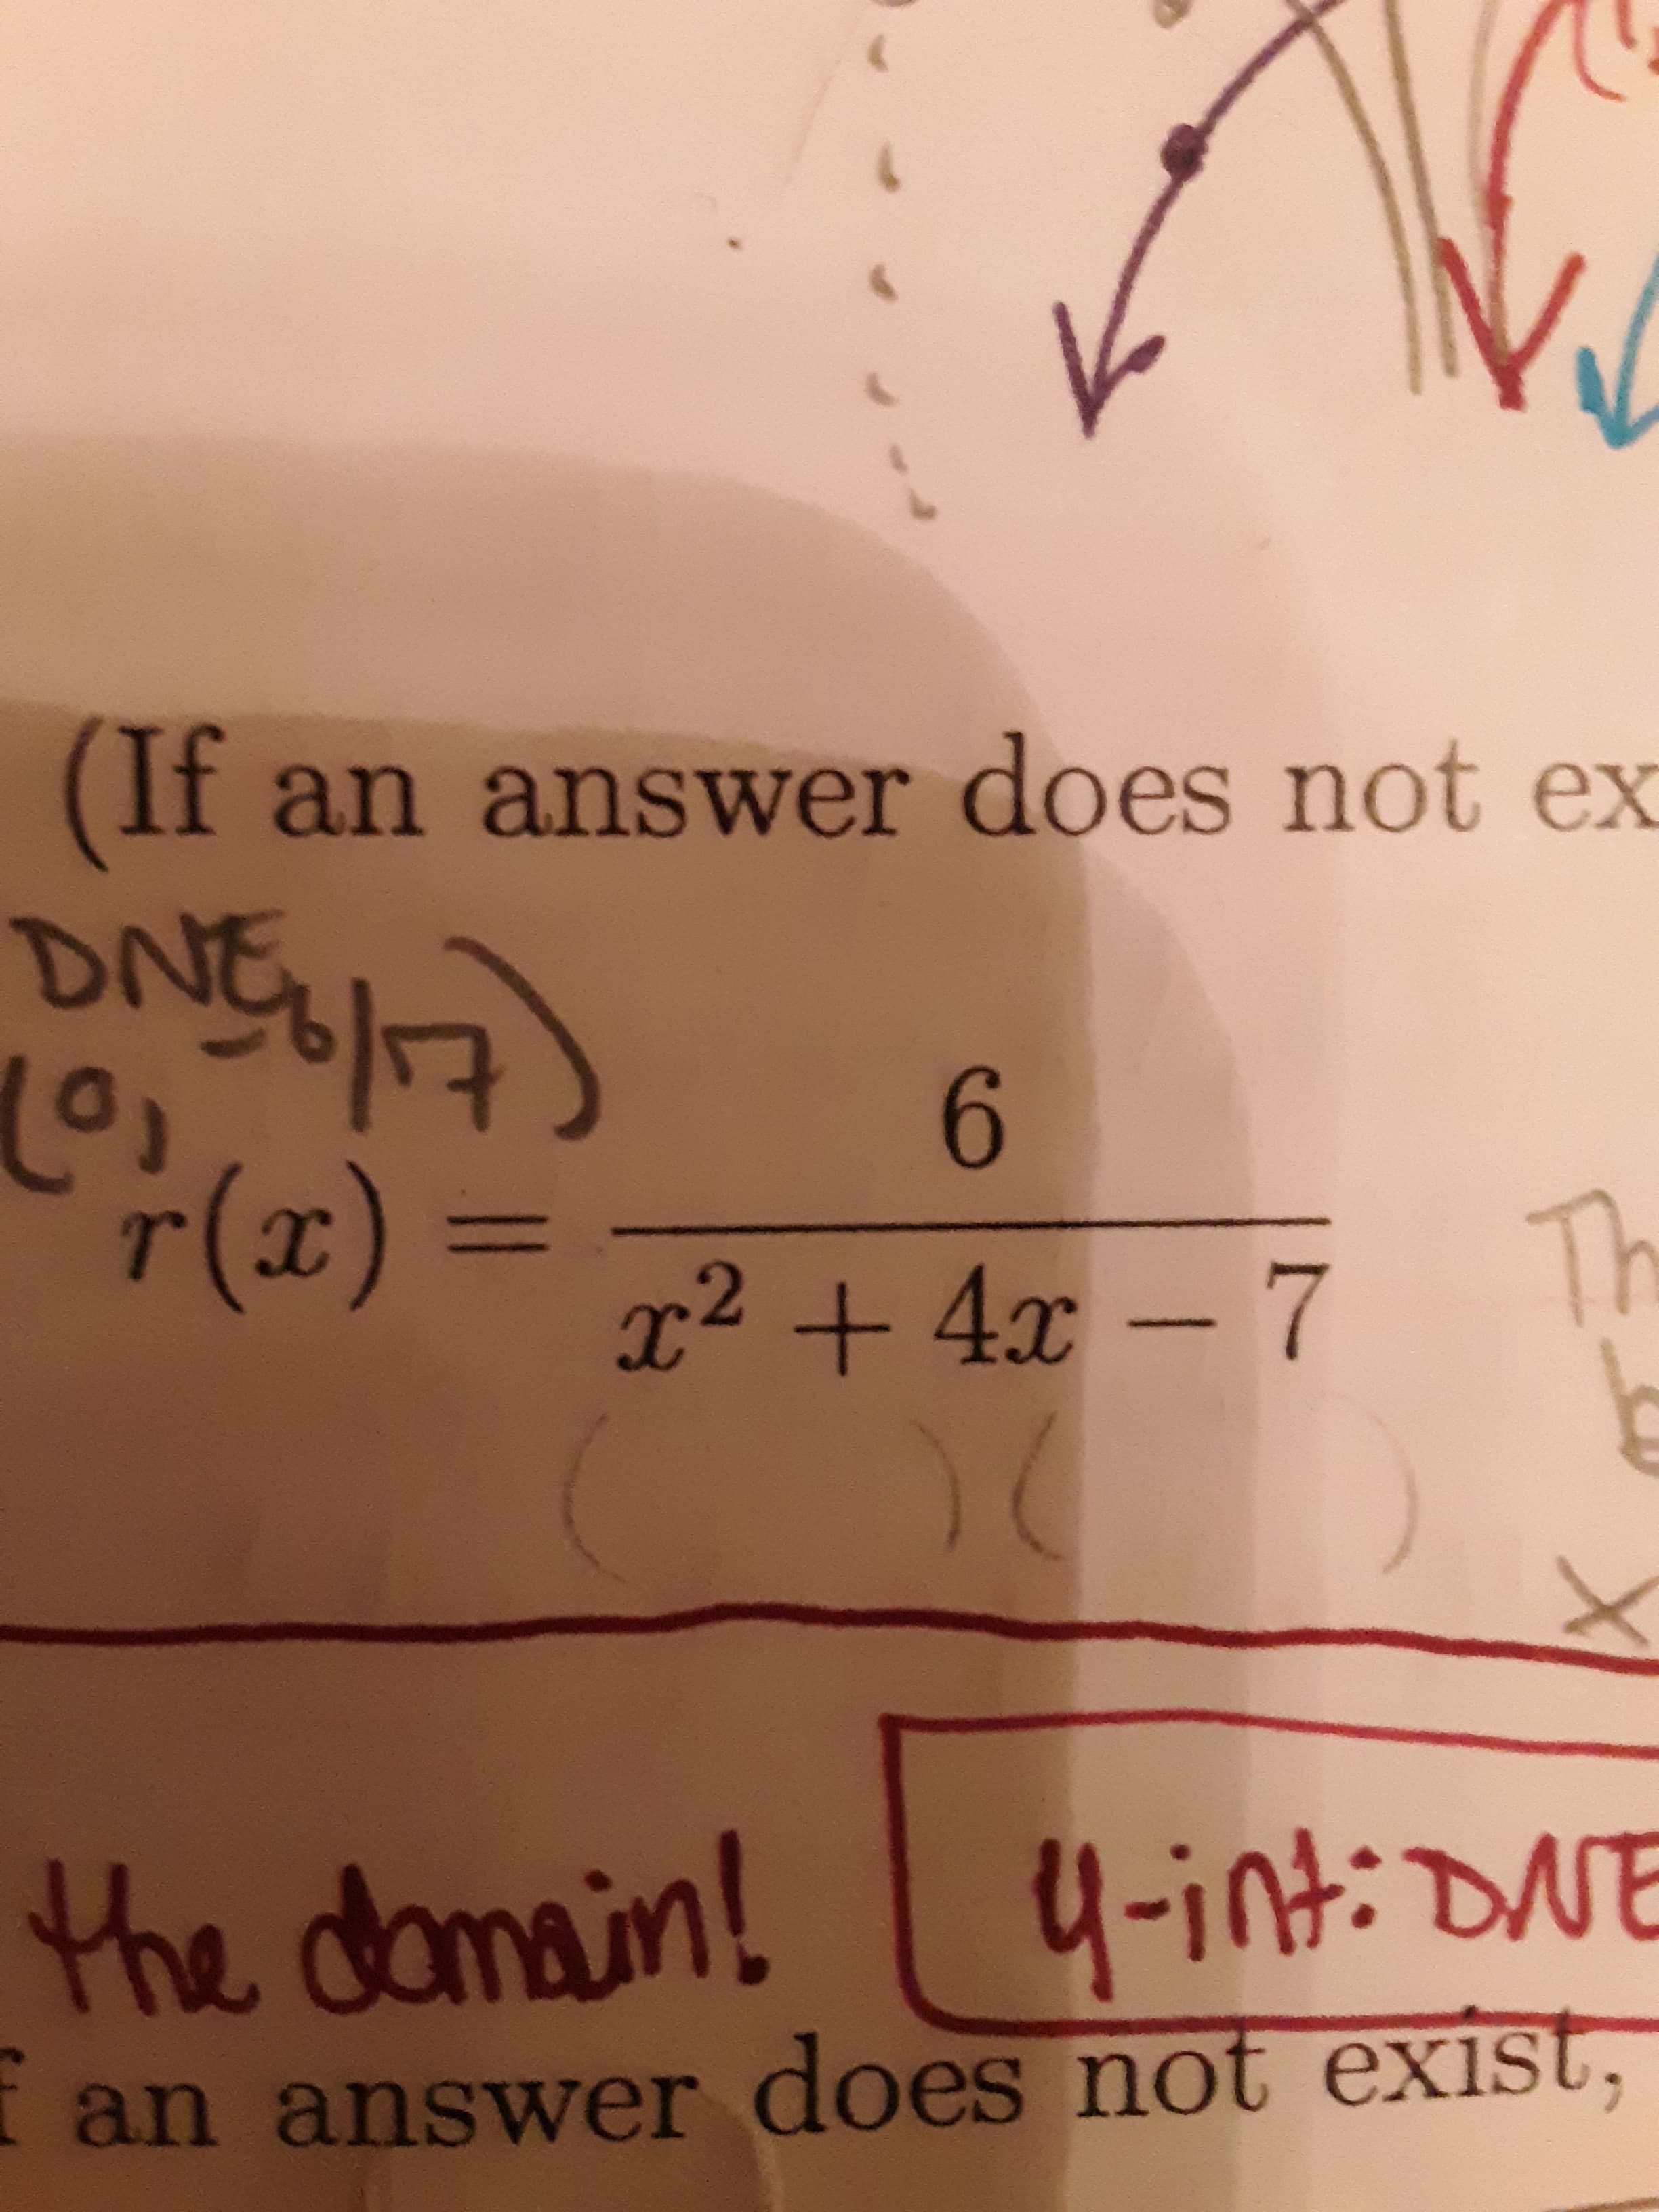 (If an answer does not ex
DNG
r(x)
6.
Th
x² +4x-7
4-int:DNE
the damain!
t an answer does not exist,
